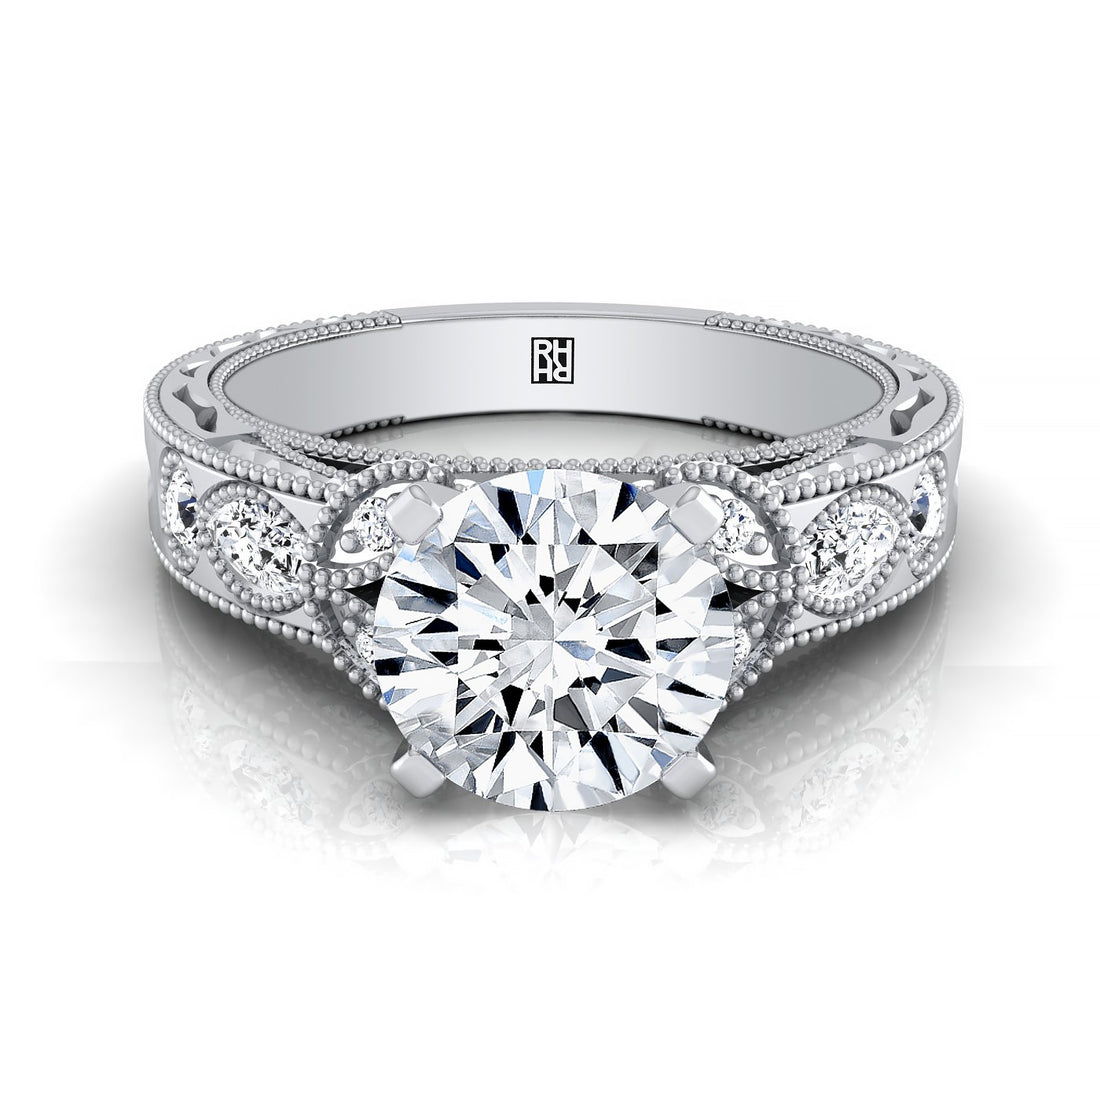 What is the Average Cost of Diamond Rings?